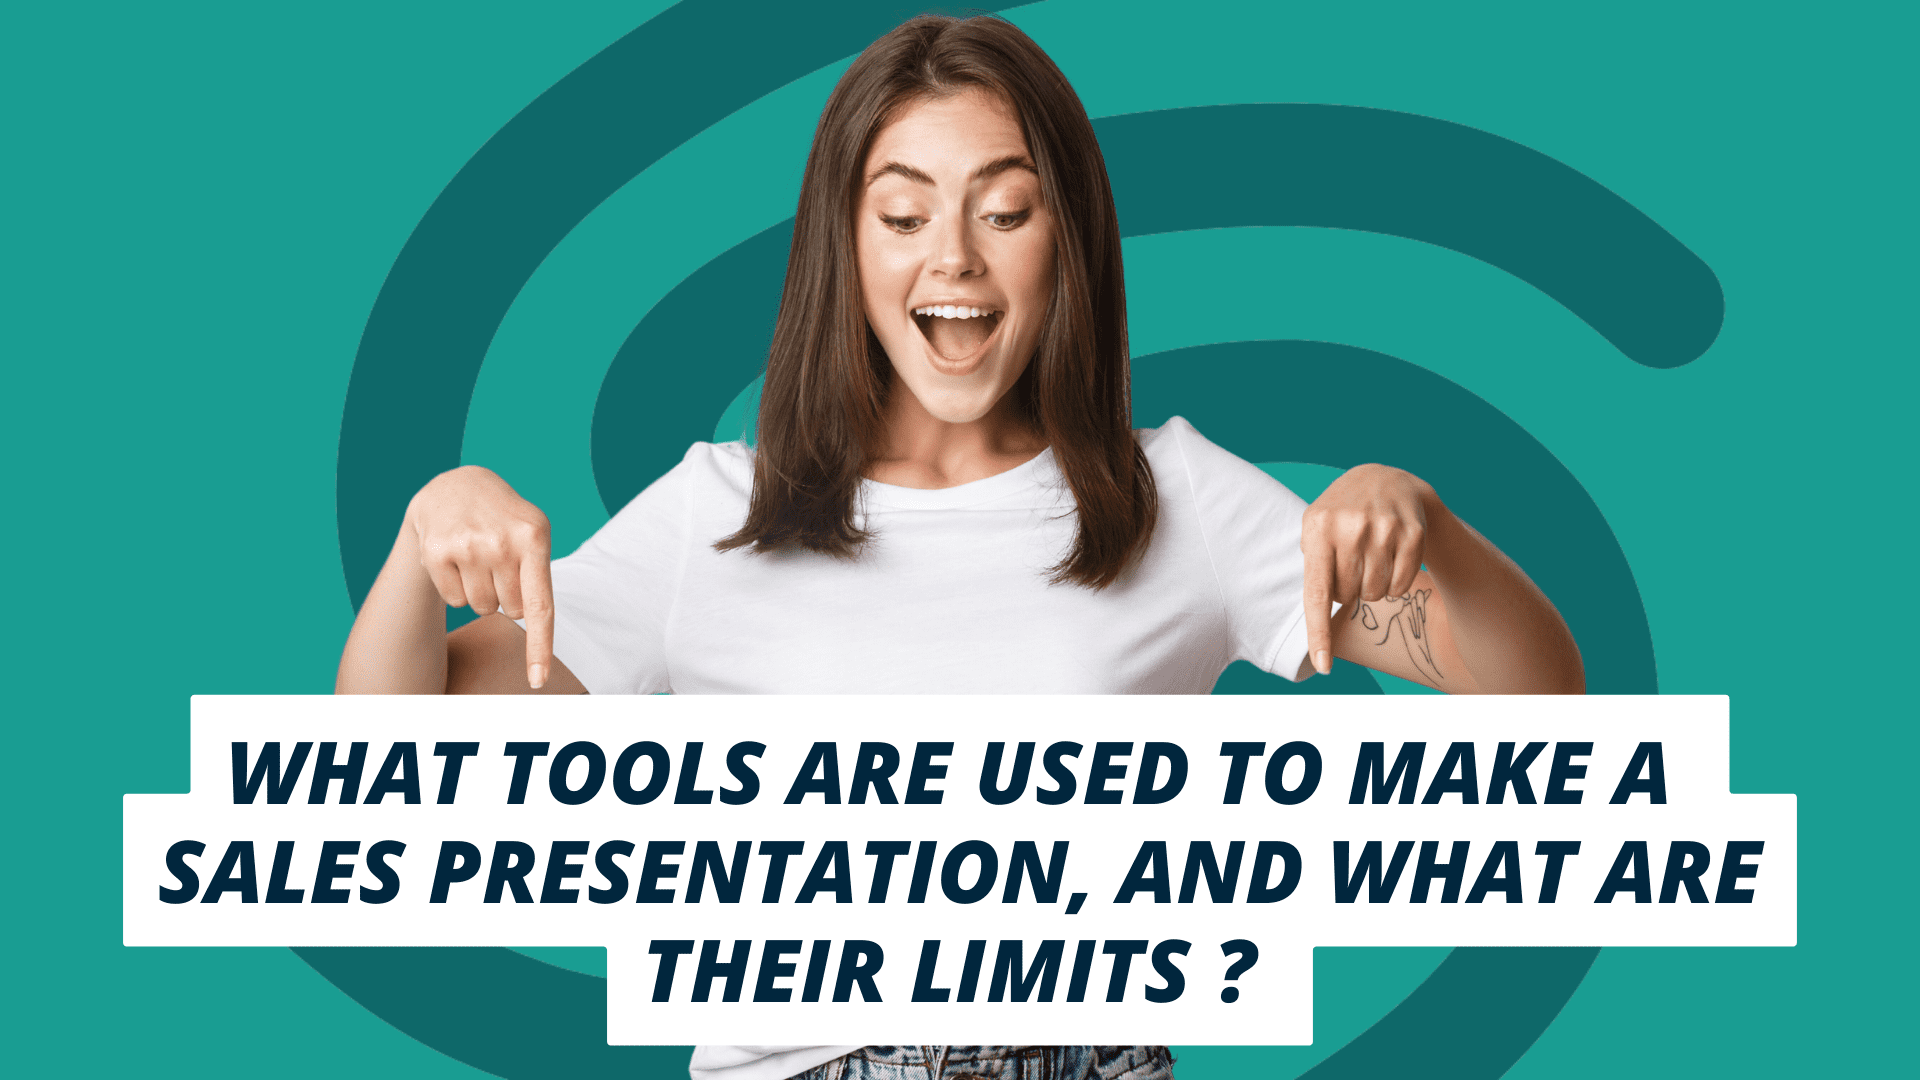 What tools are used to make a sales presentation, and what are their limits?